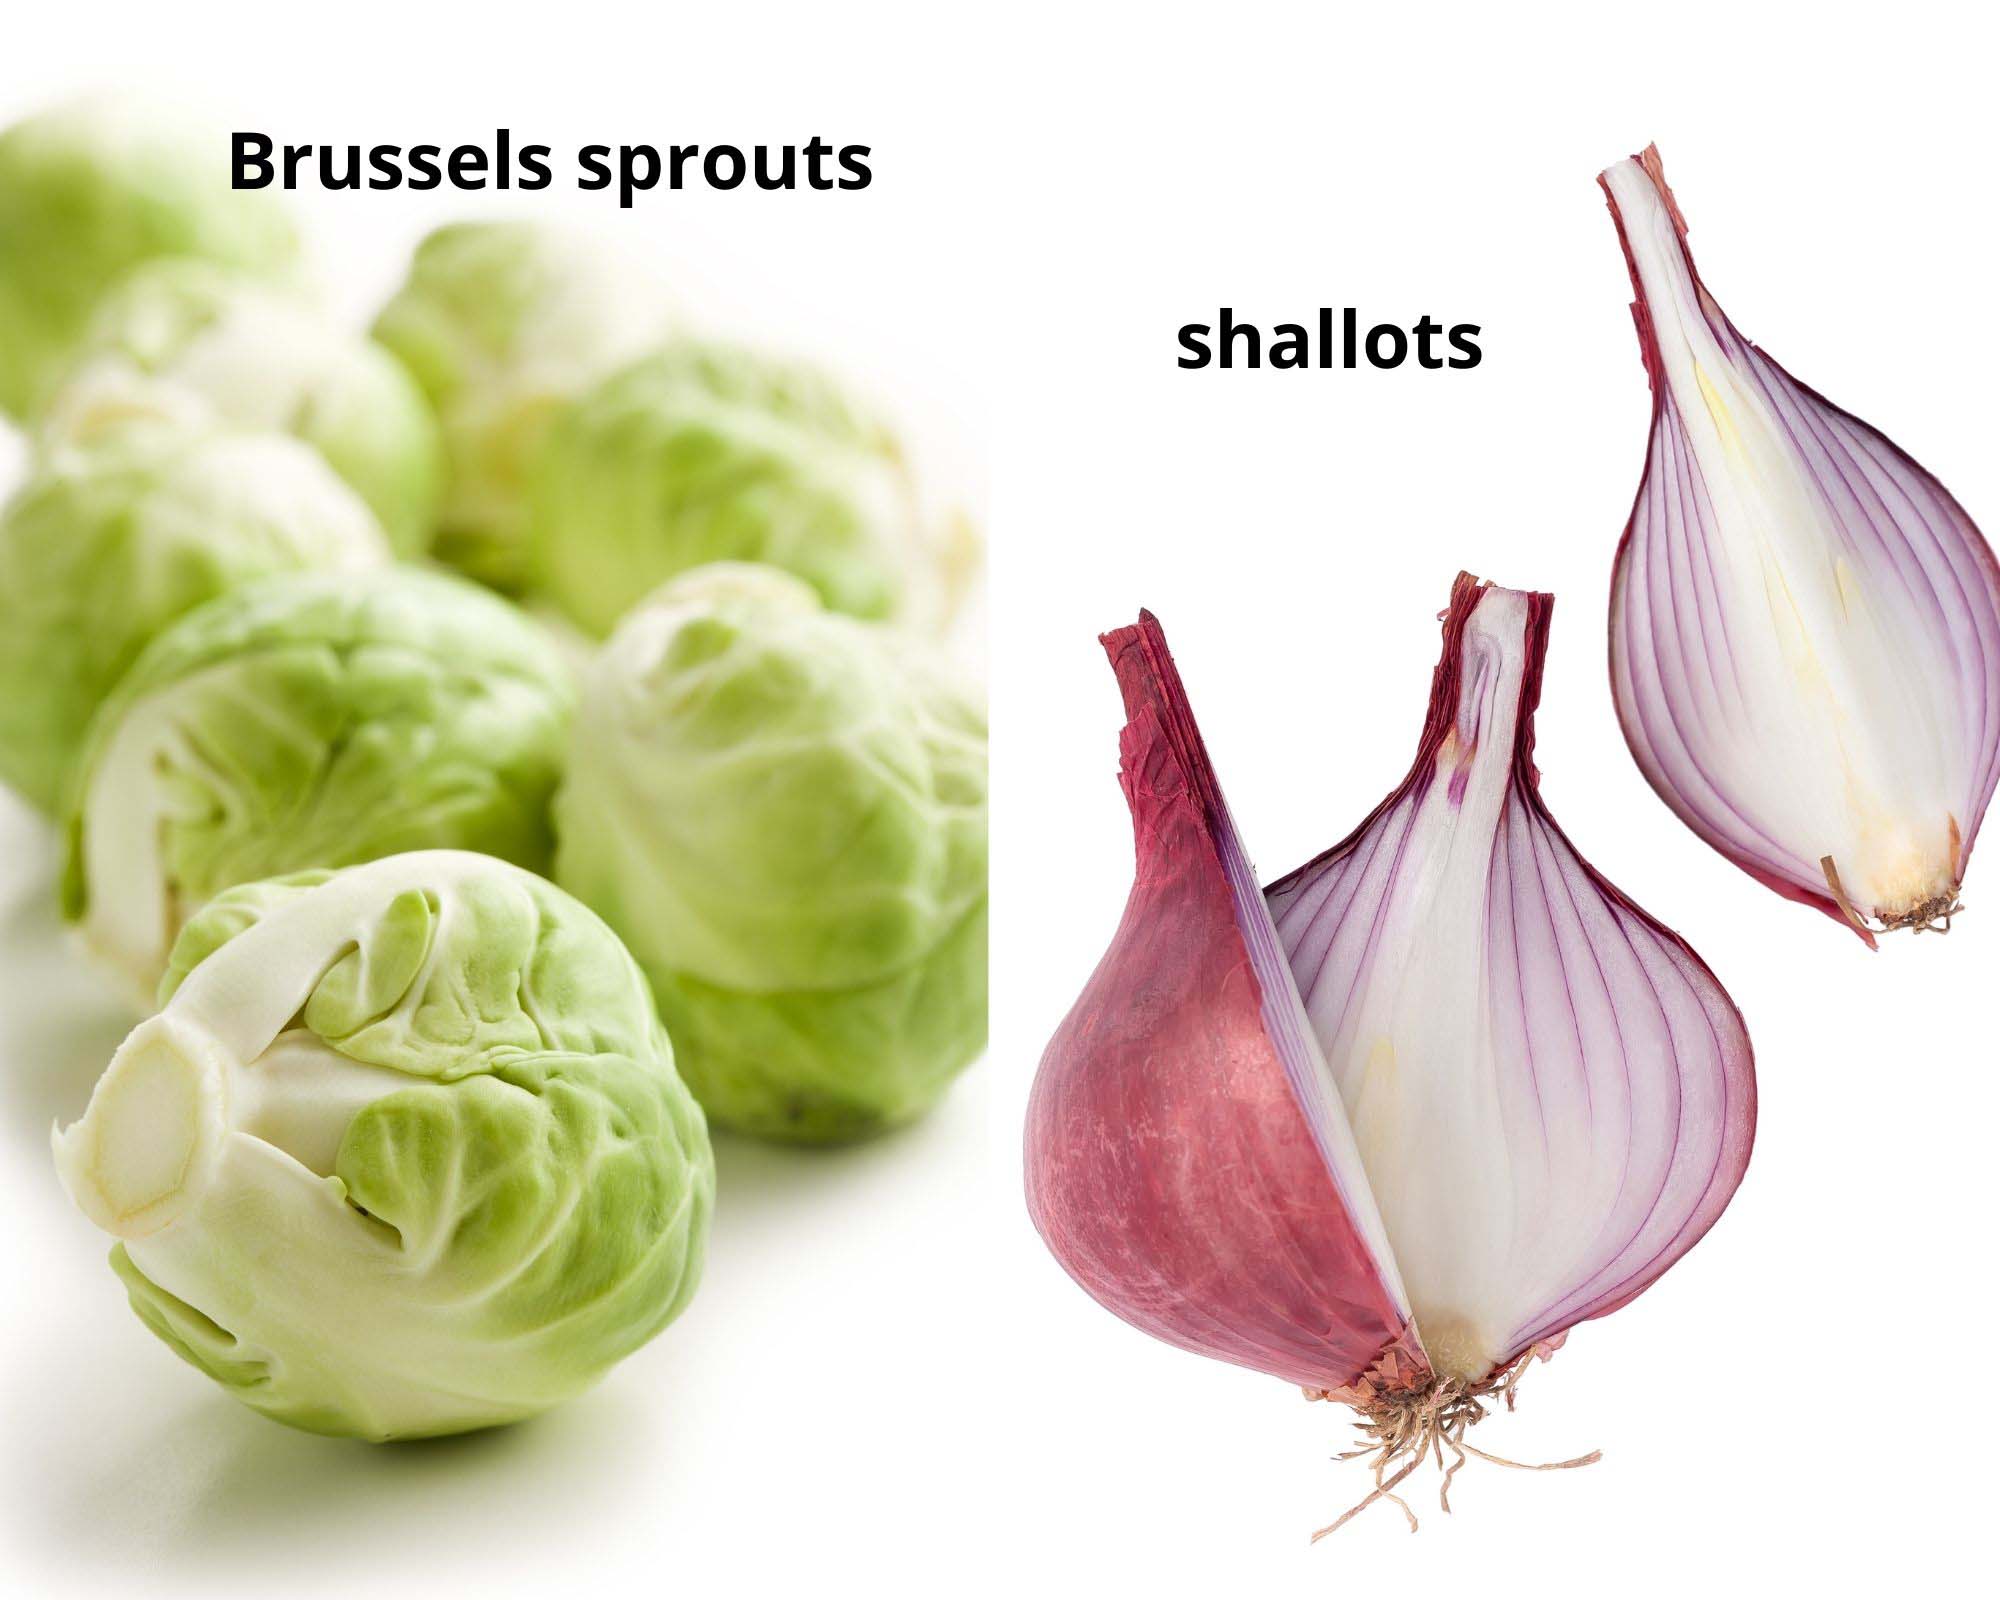 collage of two pictures of uncooked brussels sprouts and shallots.